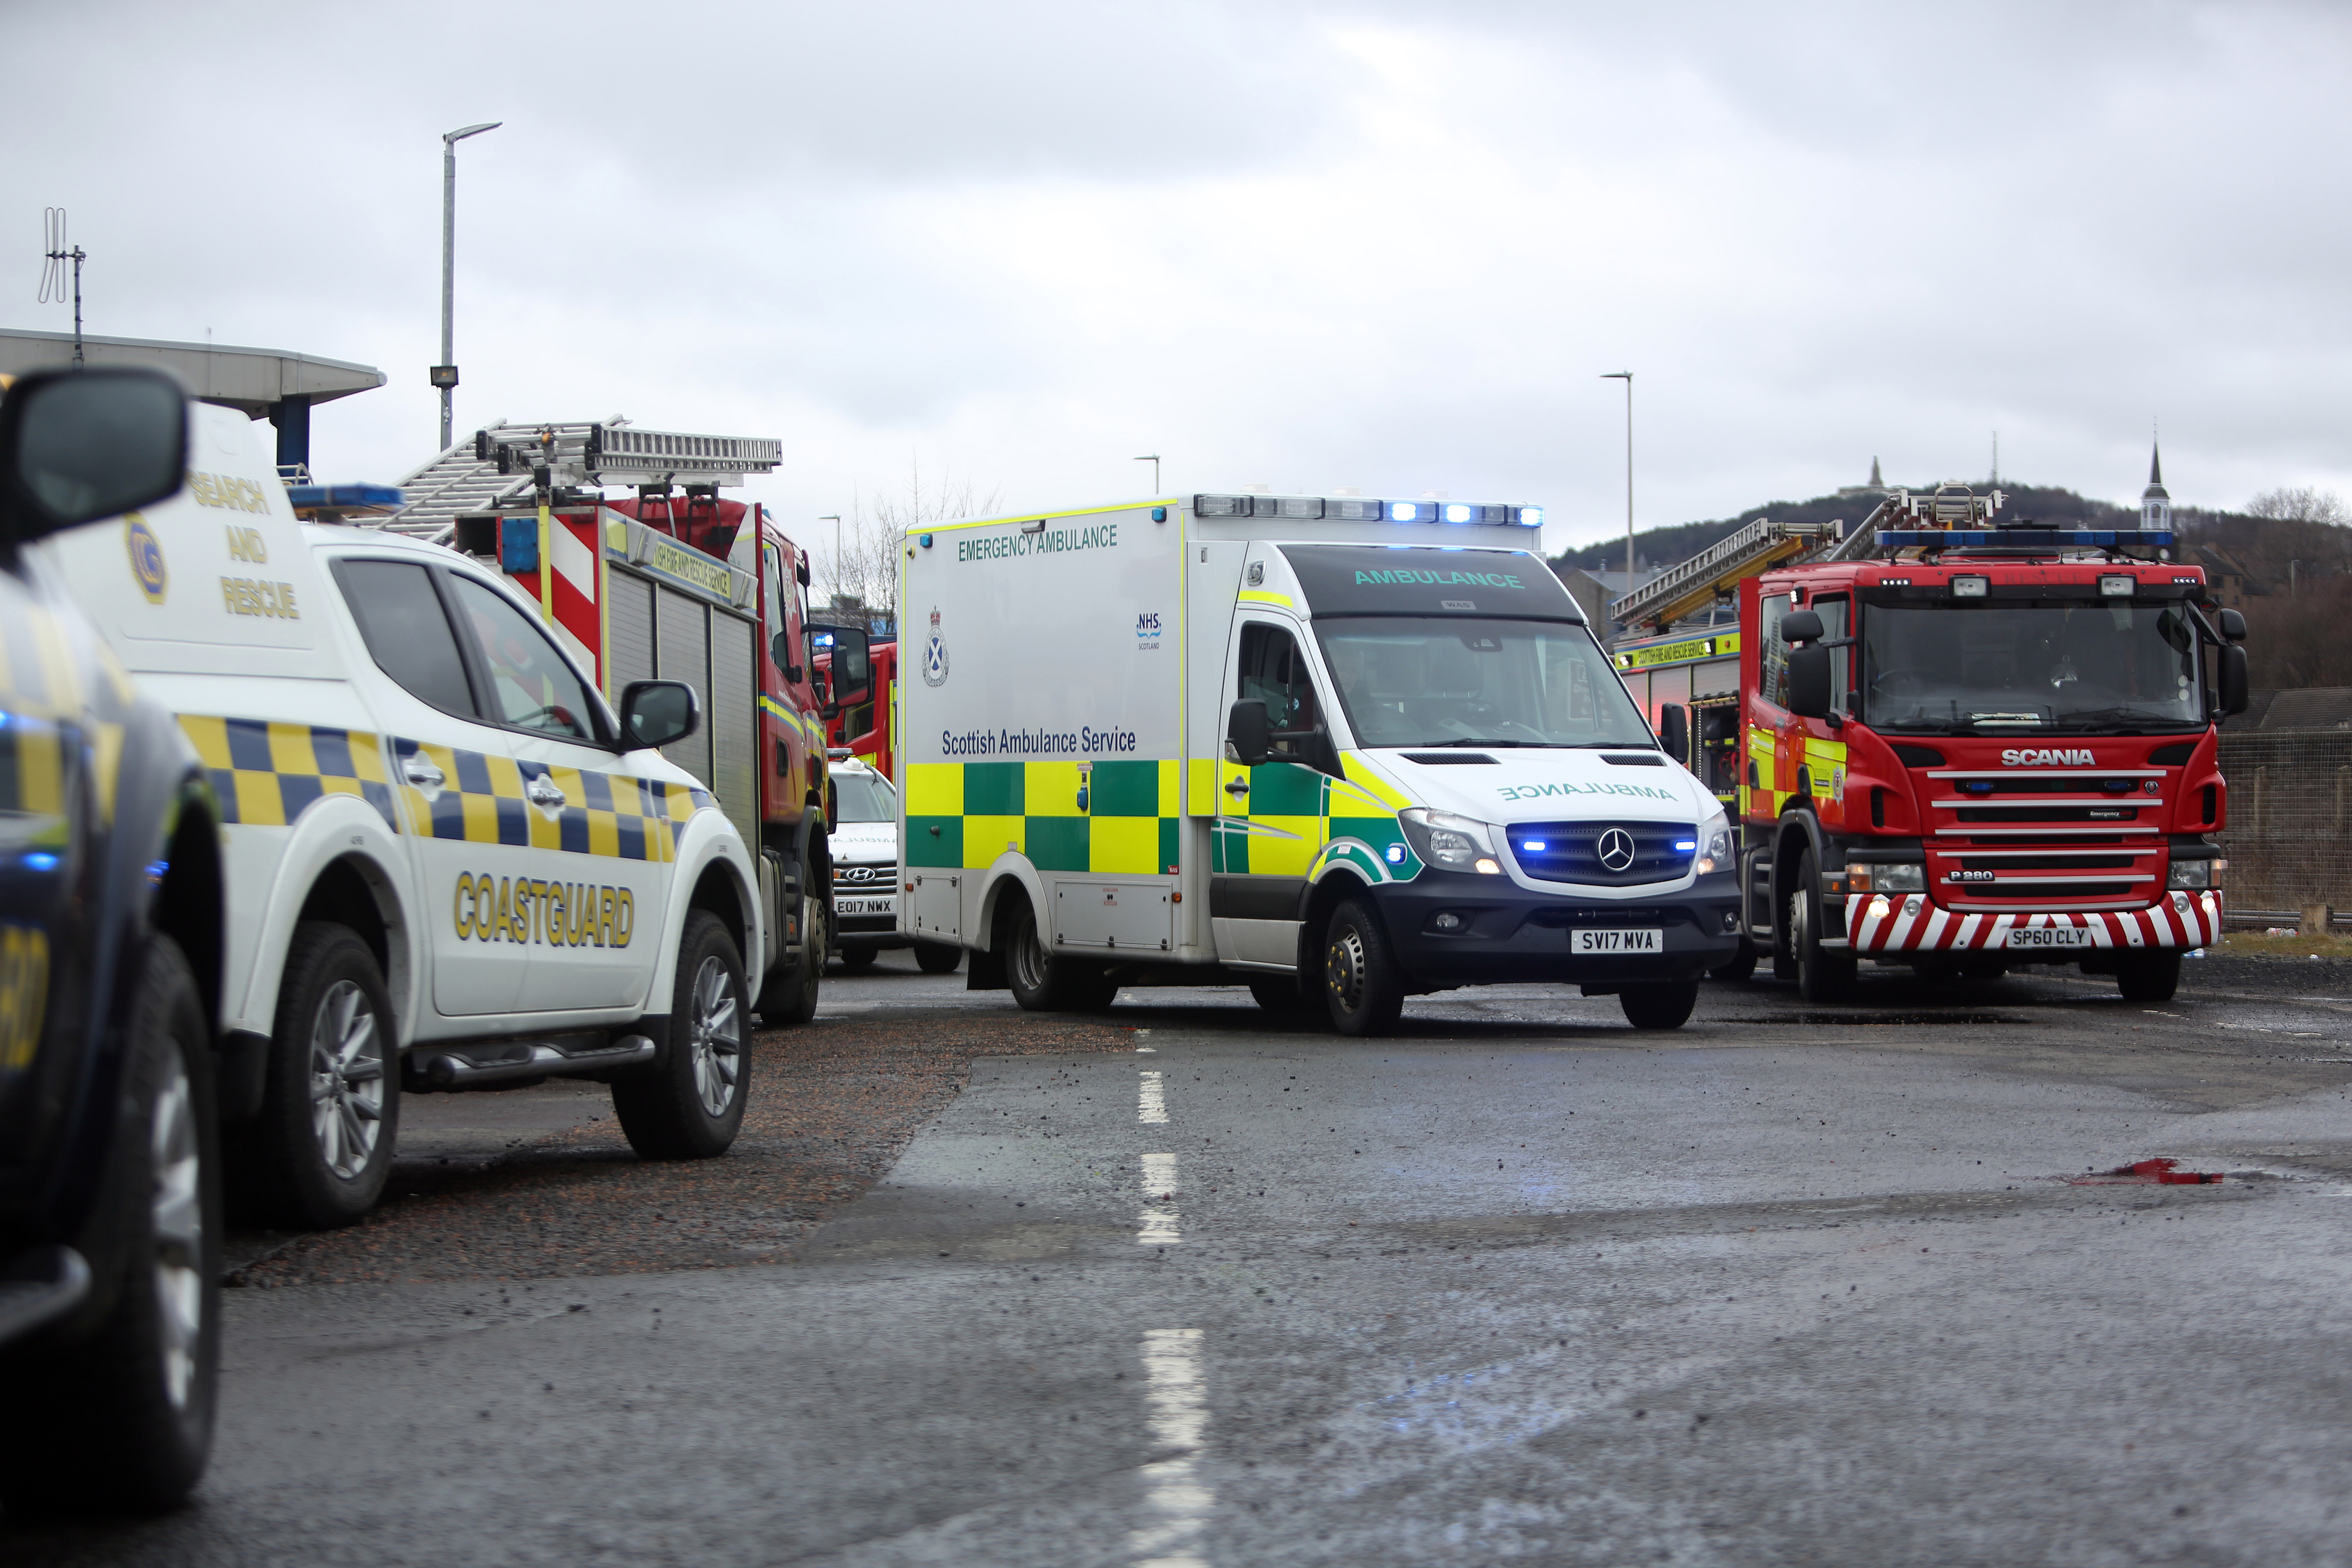 Emergency services at the scene of the incident (Kris Miller / DC Thomson)